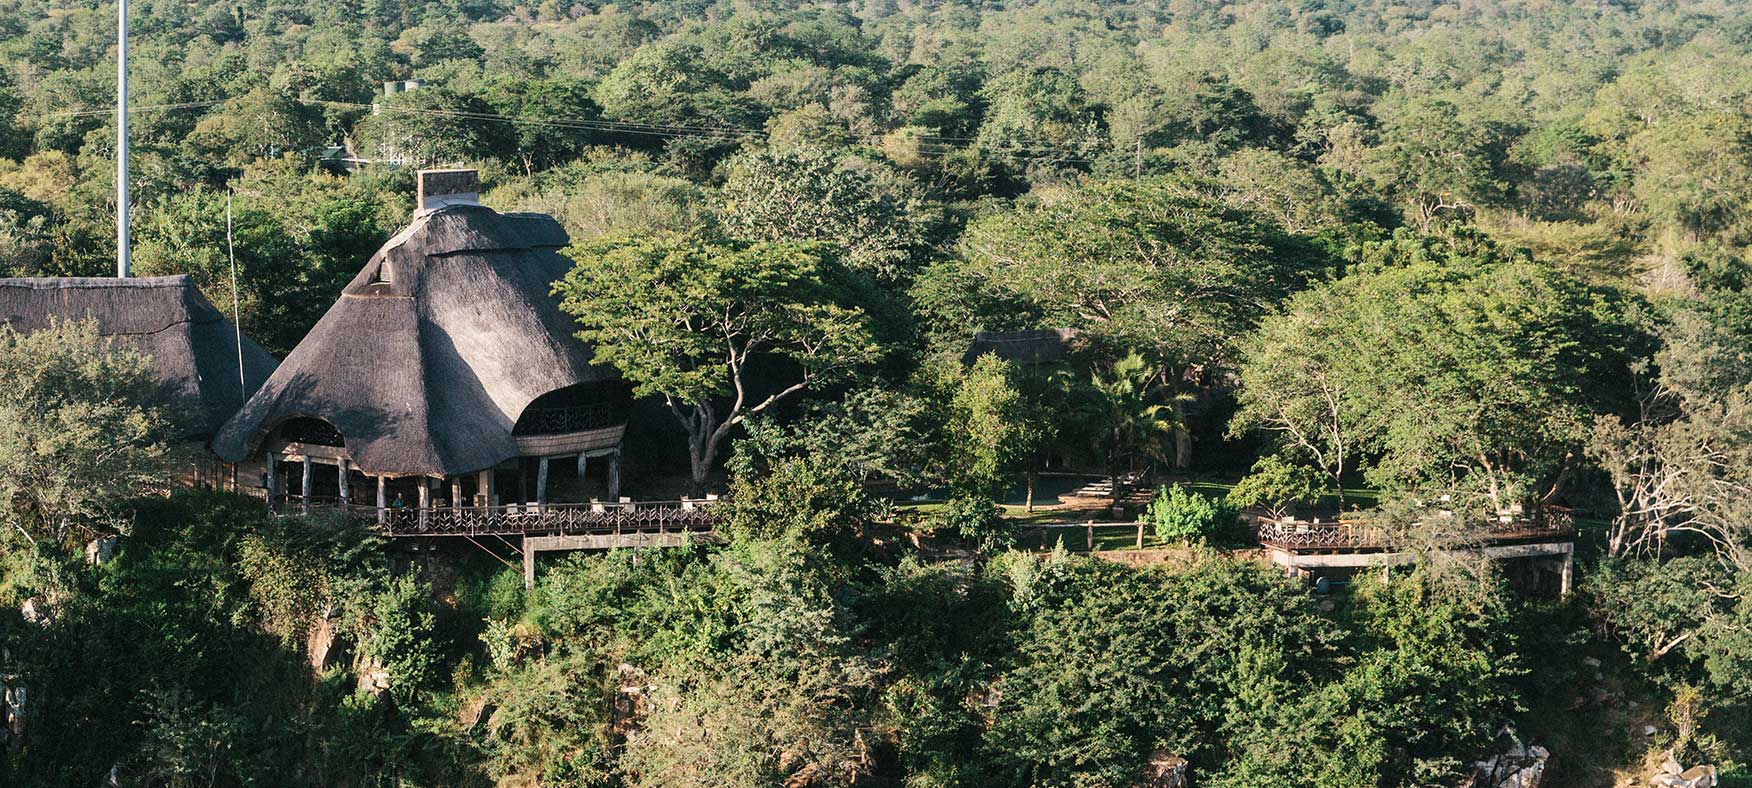 An ariel view of Chilo Gorge Lodge